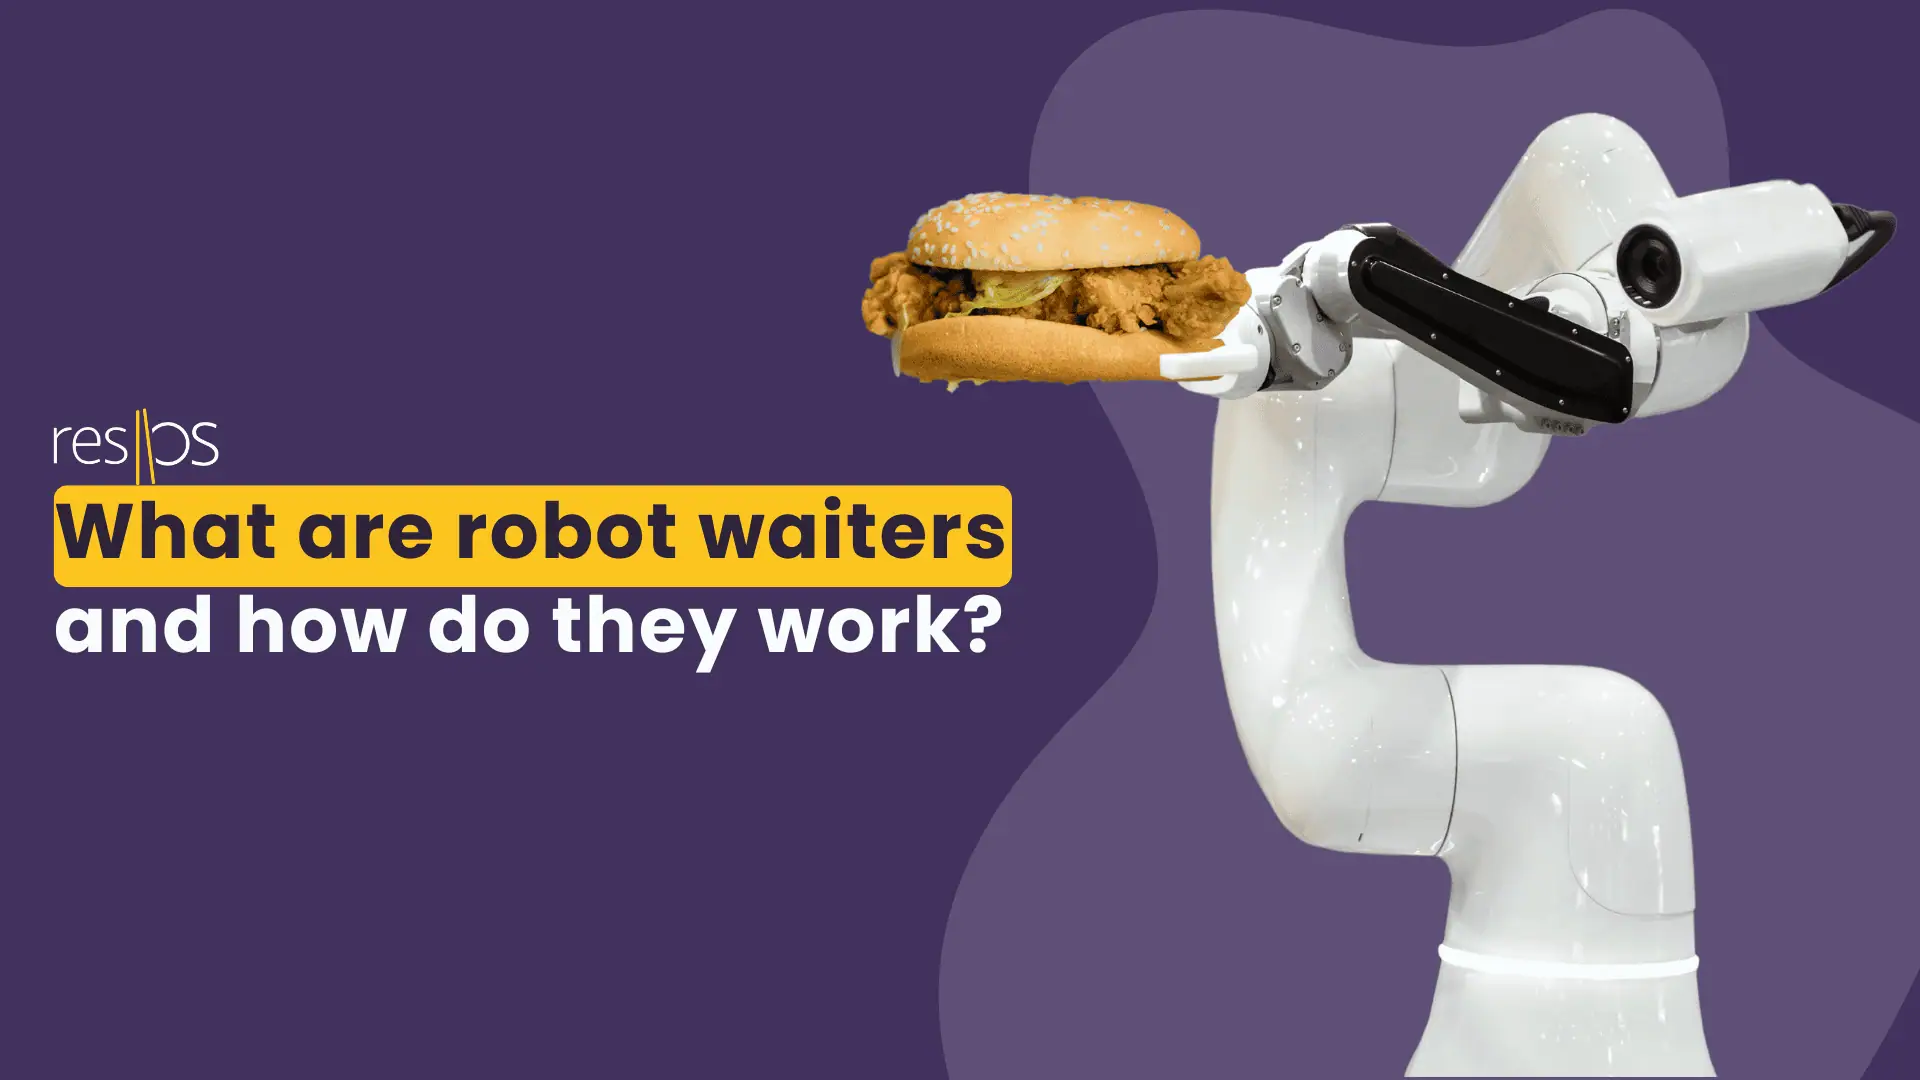 What are robot waiters and how do they work?